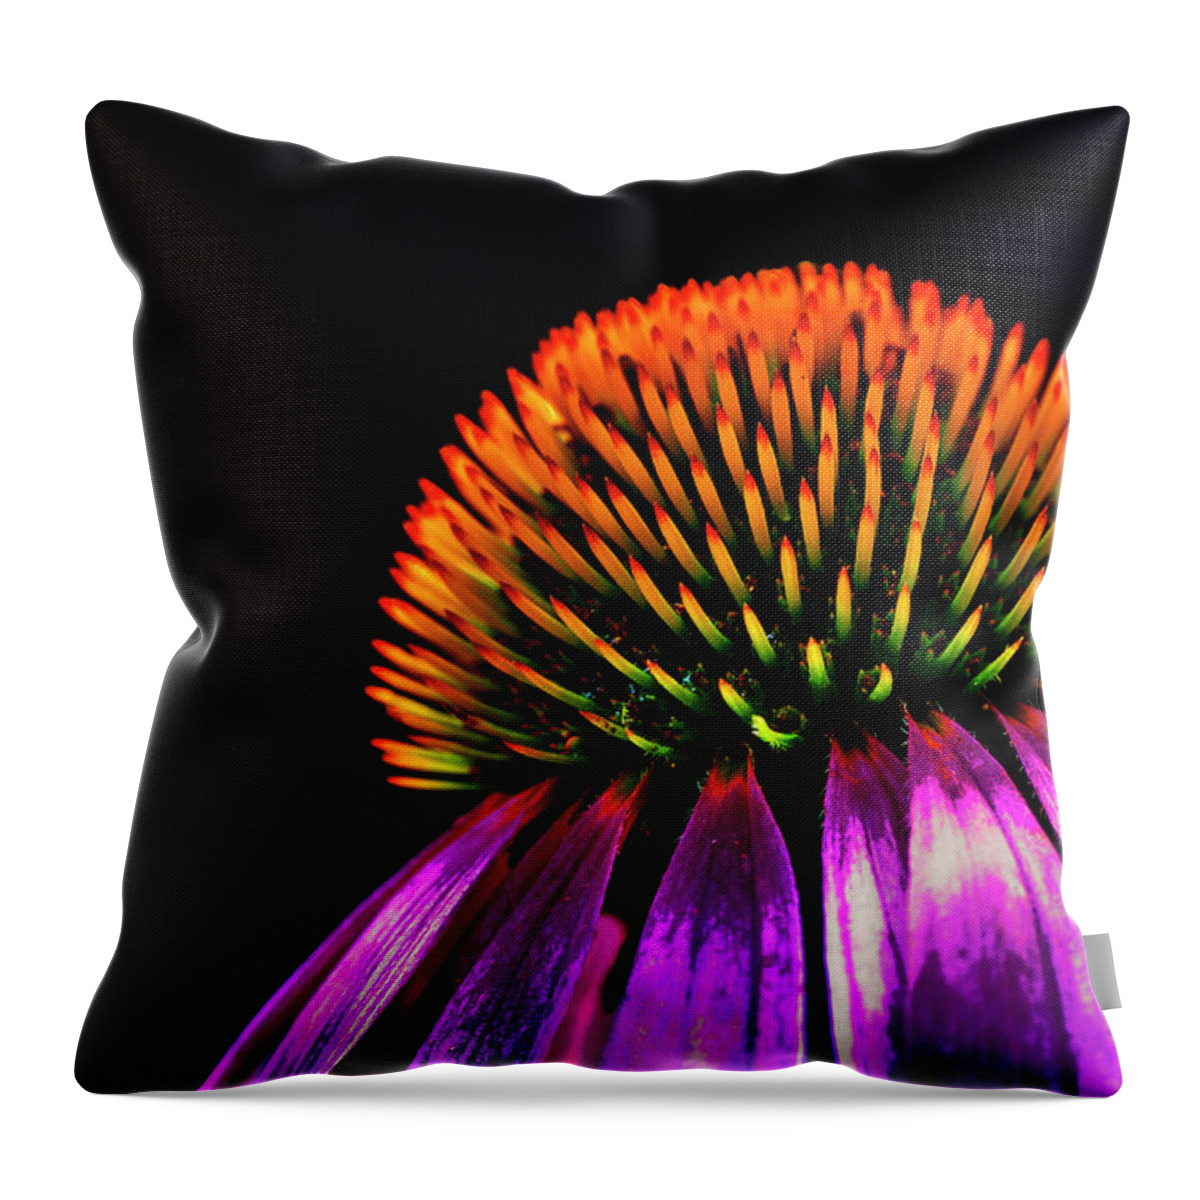 Echinacea Throw Pillow featuring the photograph Echinacea by Ivan Slosar